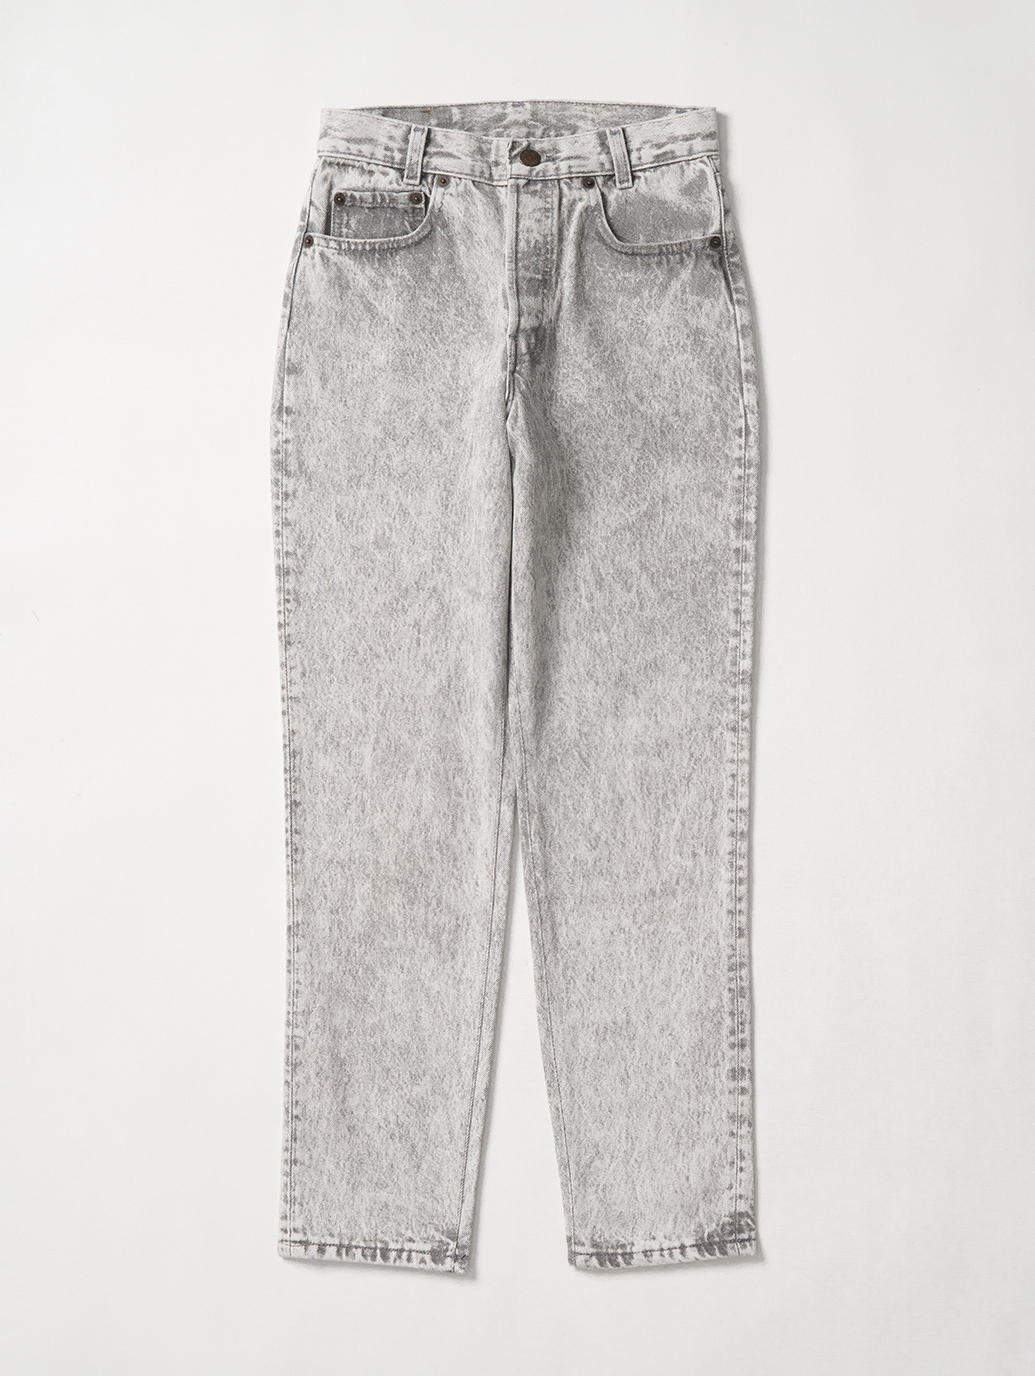 LEVI'S® AUTHORIZED VINTAGE MADE IN THE USA 501® SKINNY｜リーバイス 